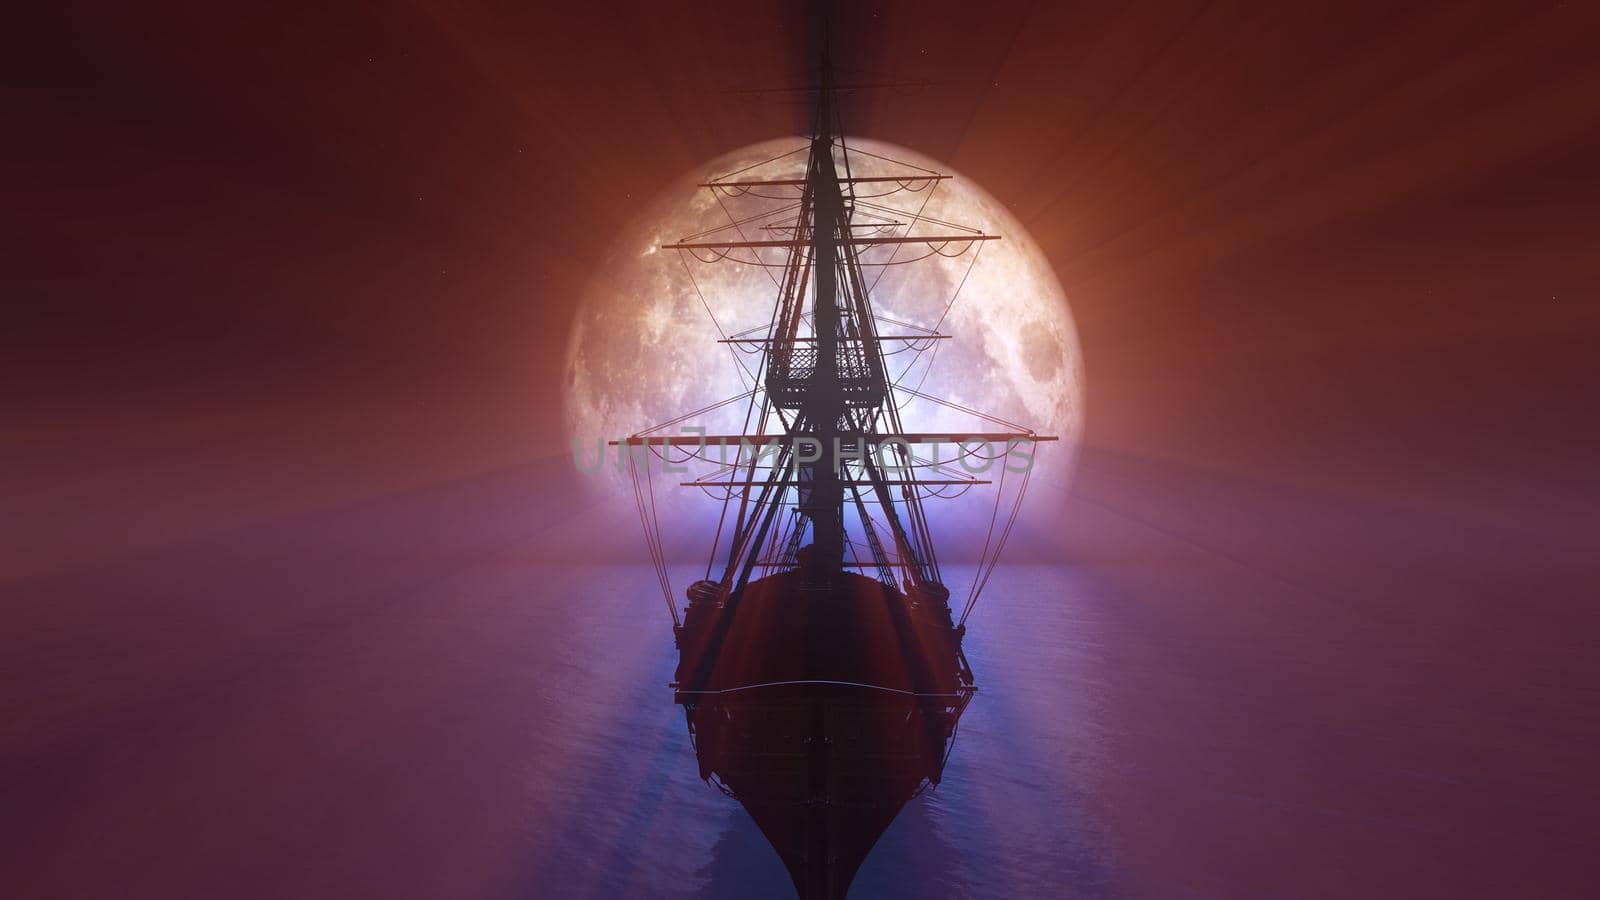 old ship in sea full moon illustration by alex_nako